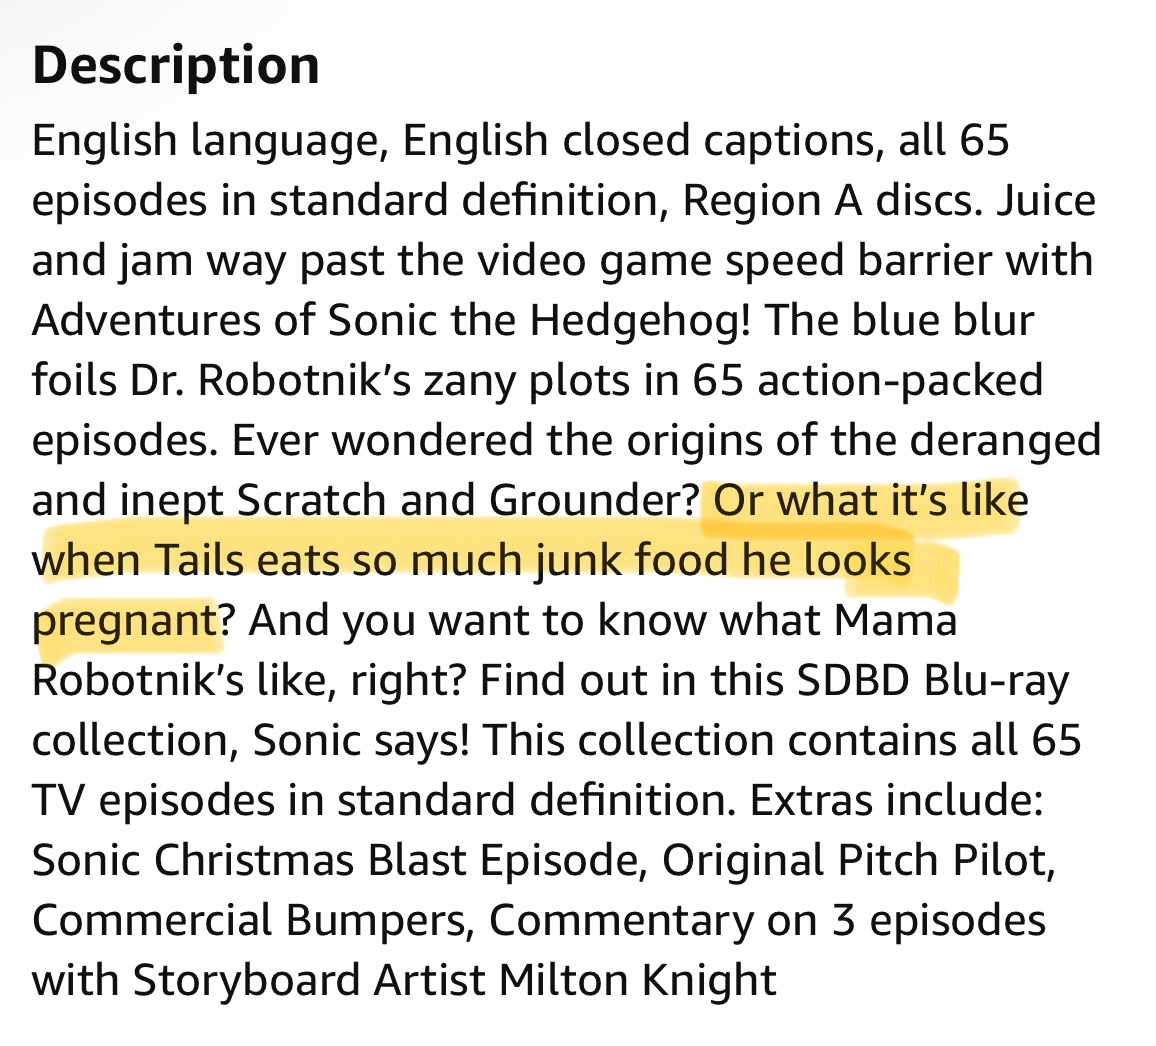 lol whoever wrote this description for the Adventures of Sonic the Hedgehog Blu-ray definitely did this on purpose